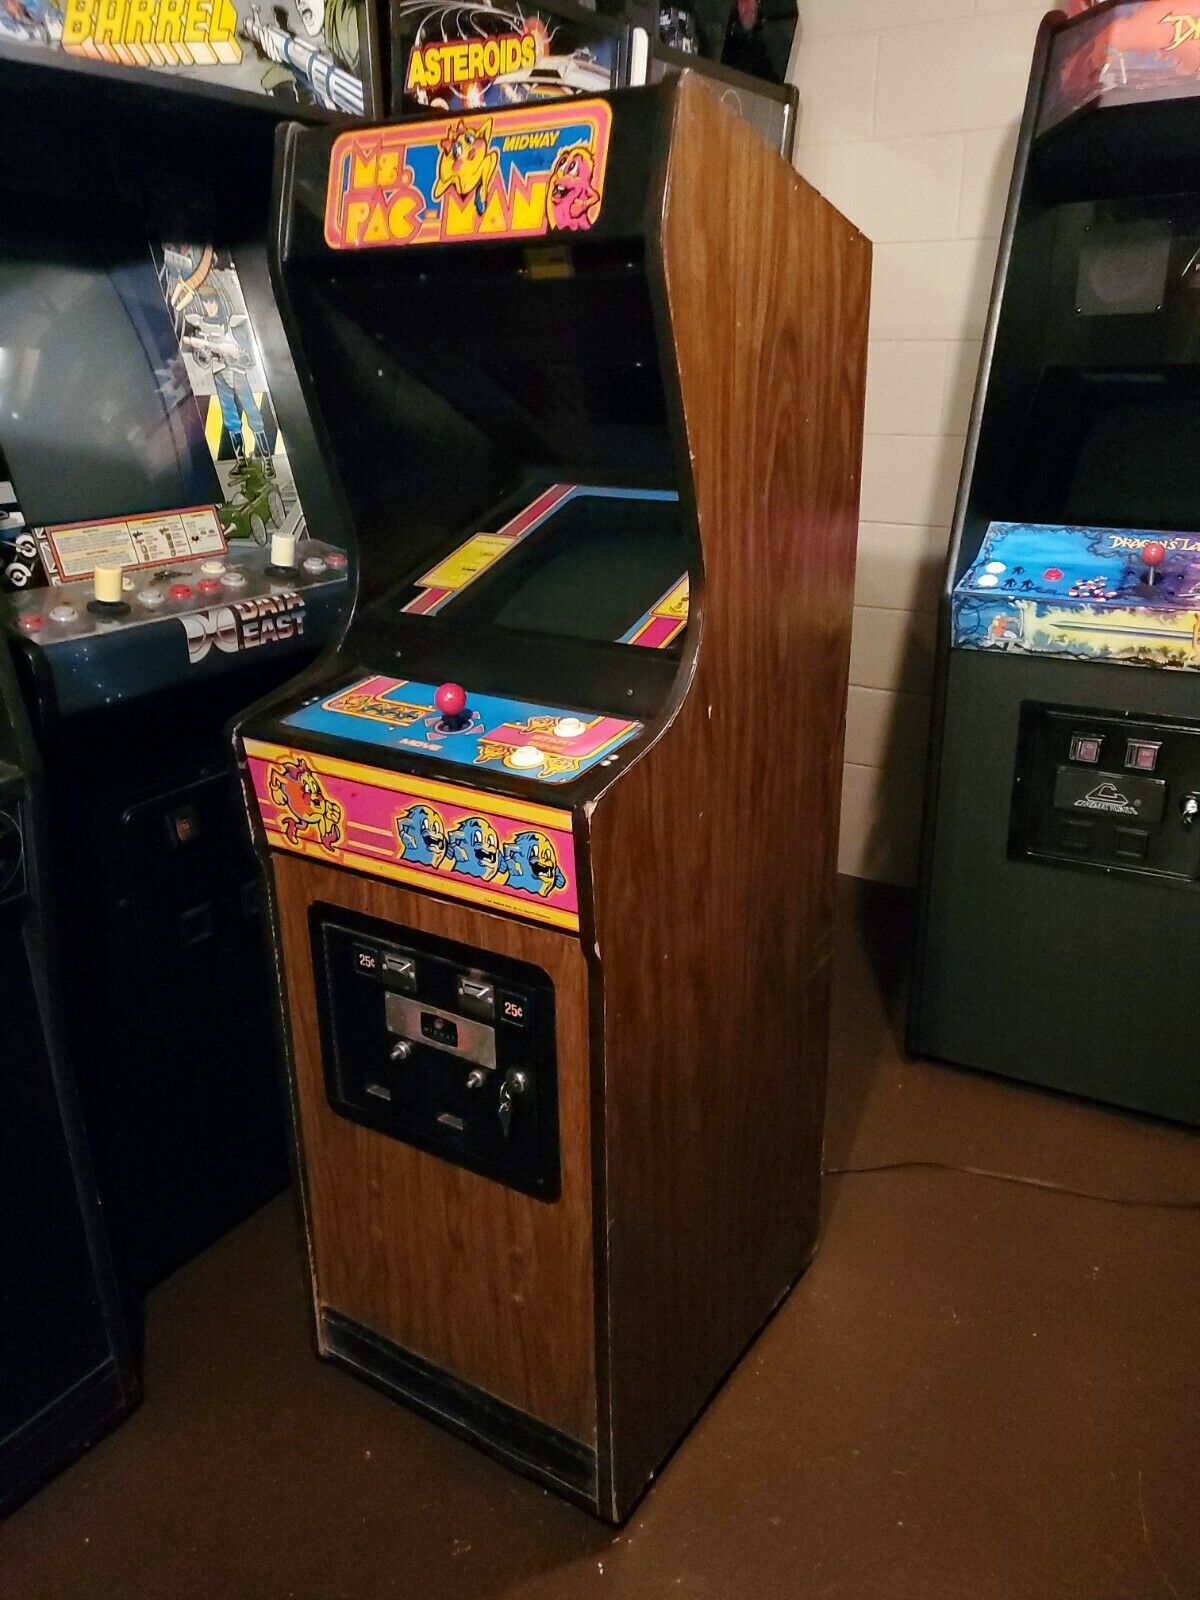 60-in-1 Arcade Coin Operated Ms Pac-Man Pacman Cabaret Working SW Michigan